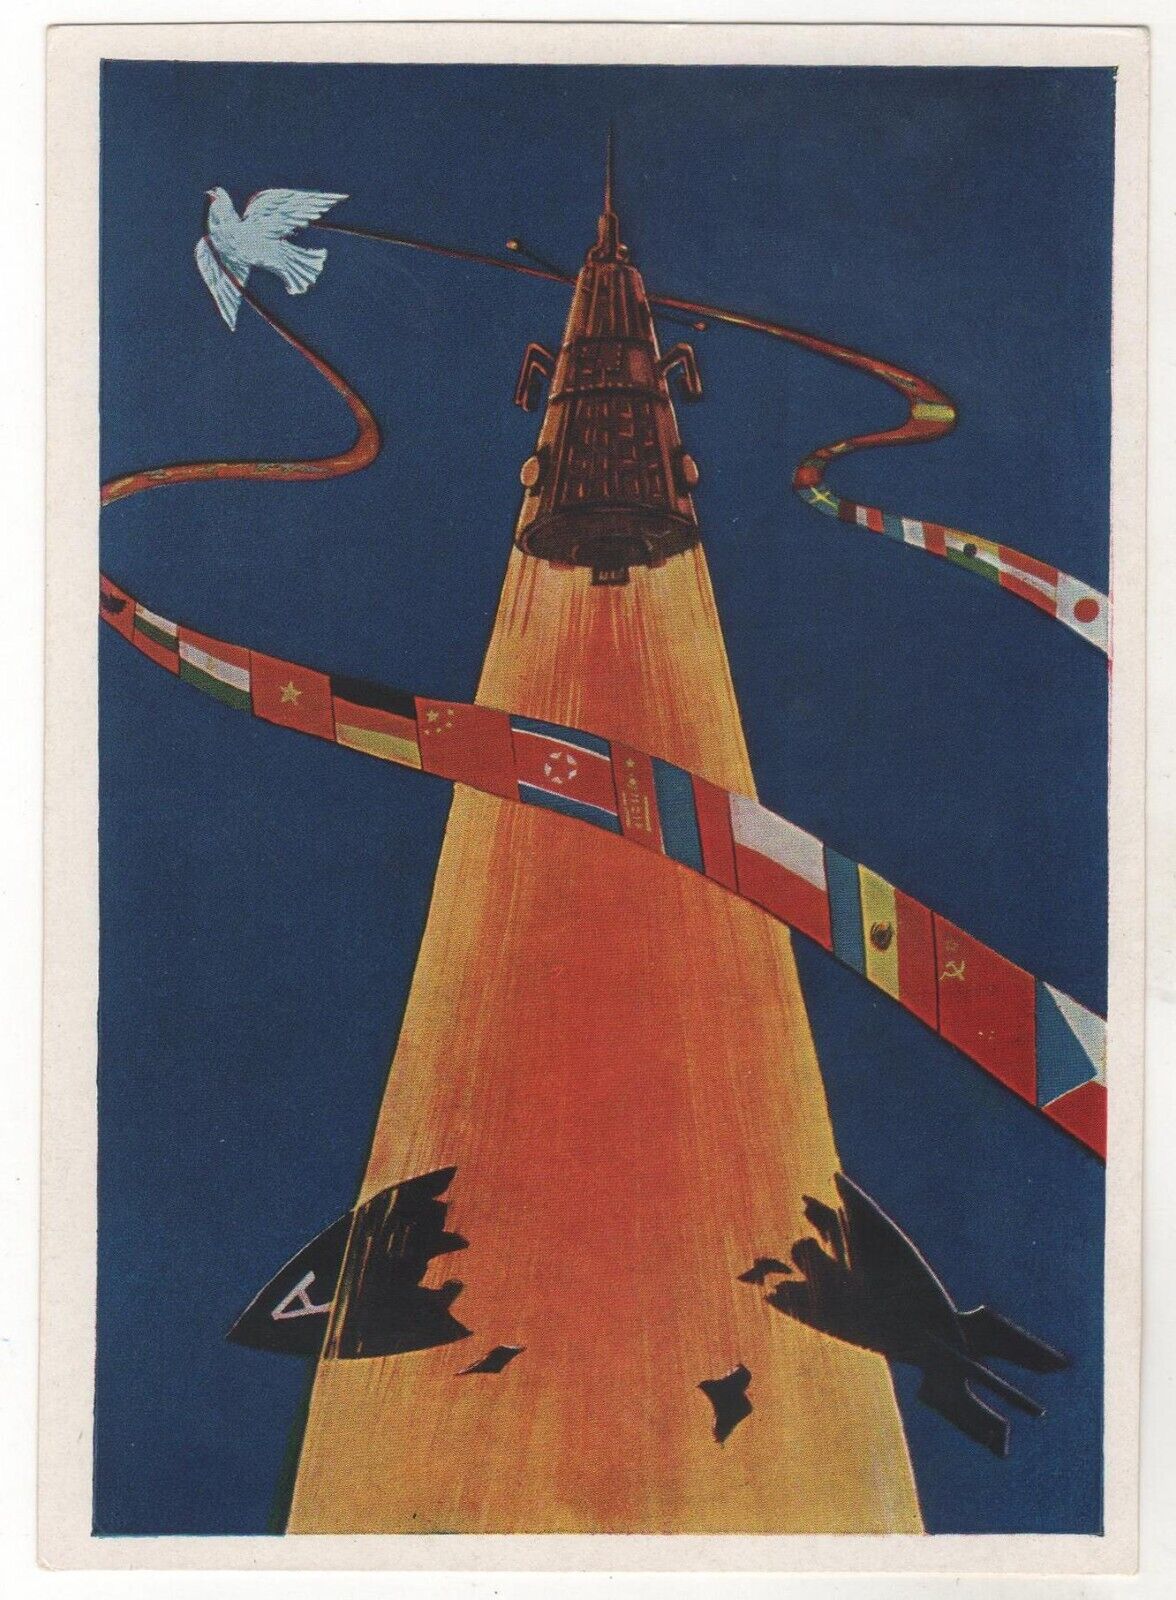 1961 SPACE Anti military Nuclear 